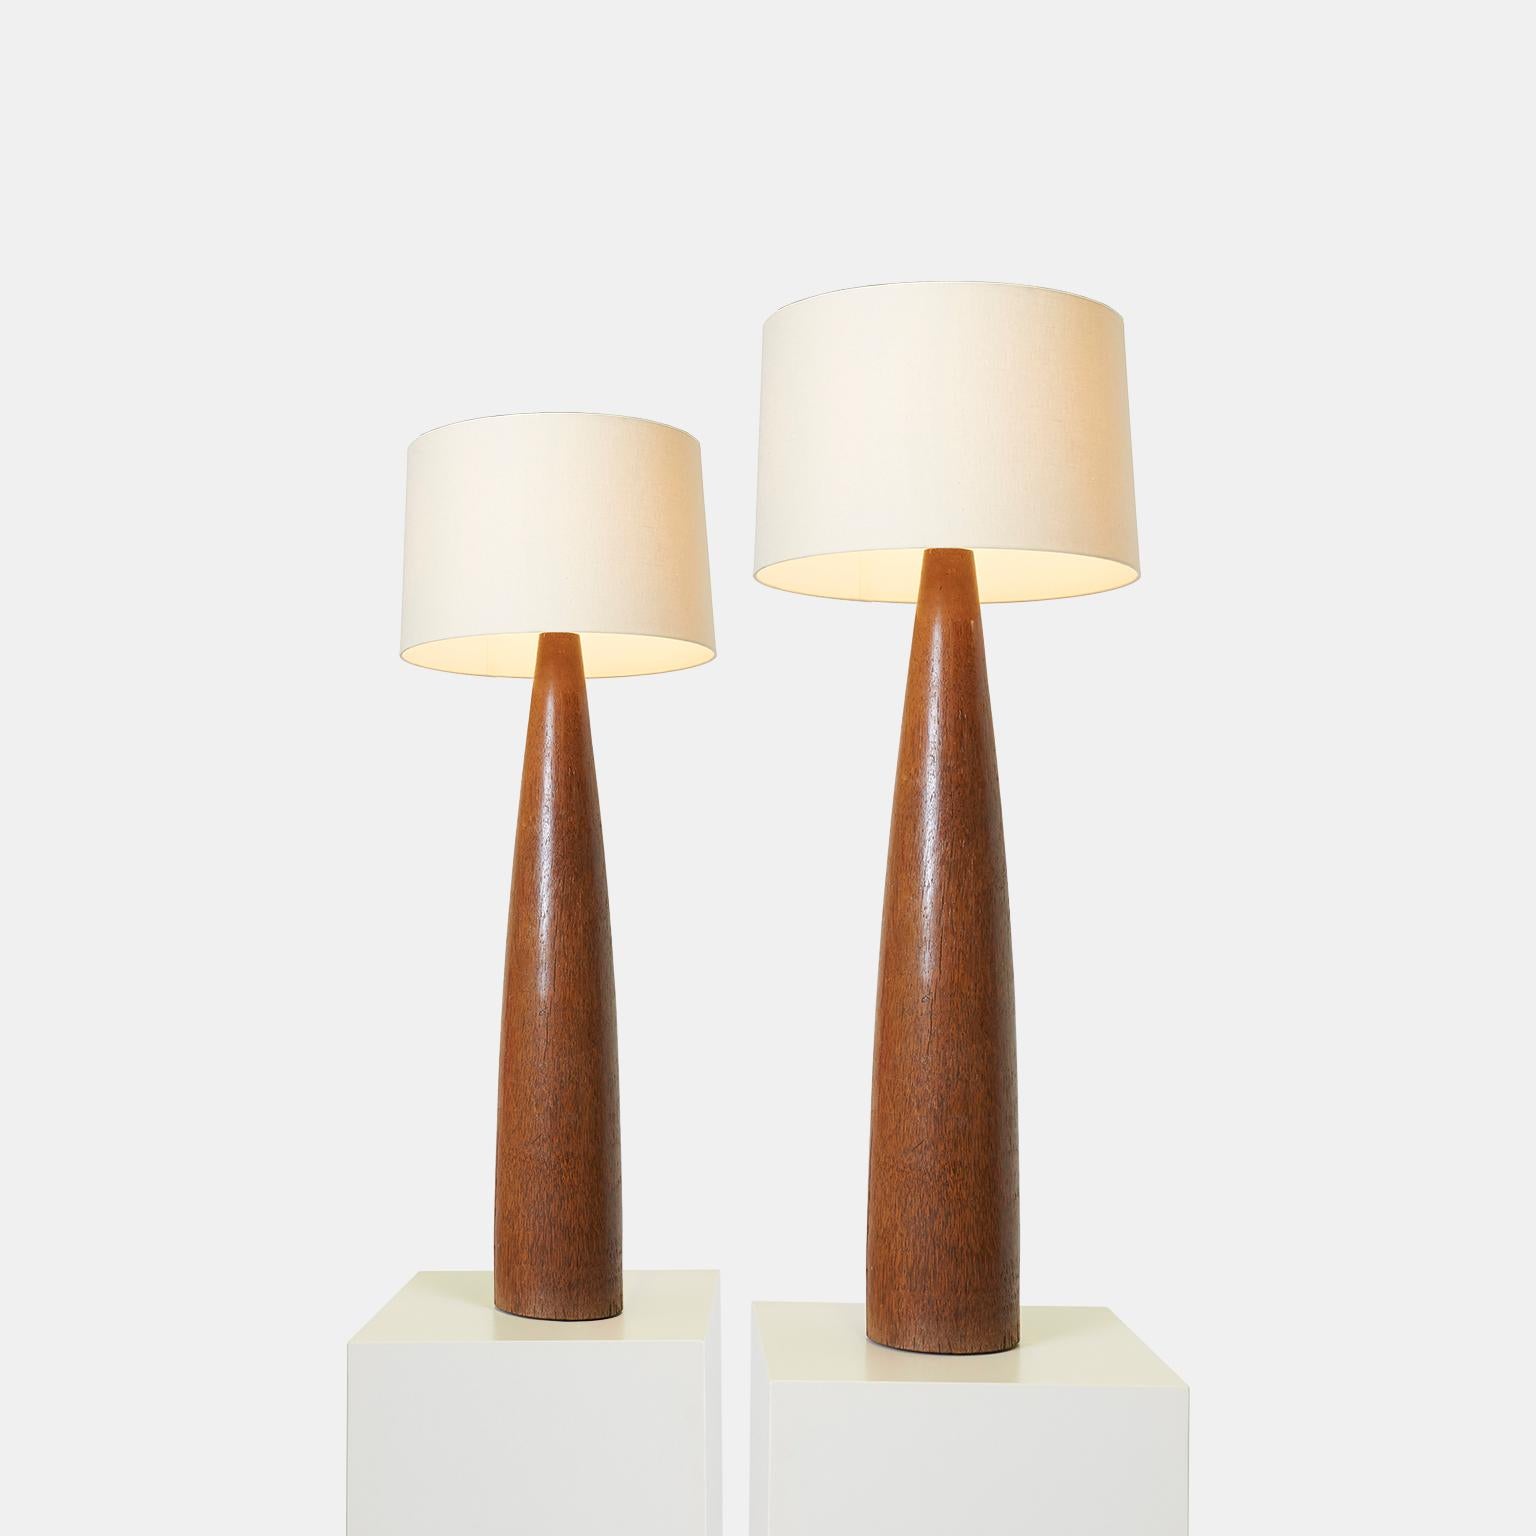 A pair of tall palm wood lamps from the iconic Hollywood Prop House which had a reputation for craftsmanship and creating pieces that were built to last.

Marked on the base 